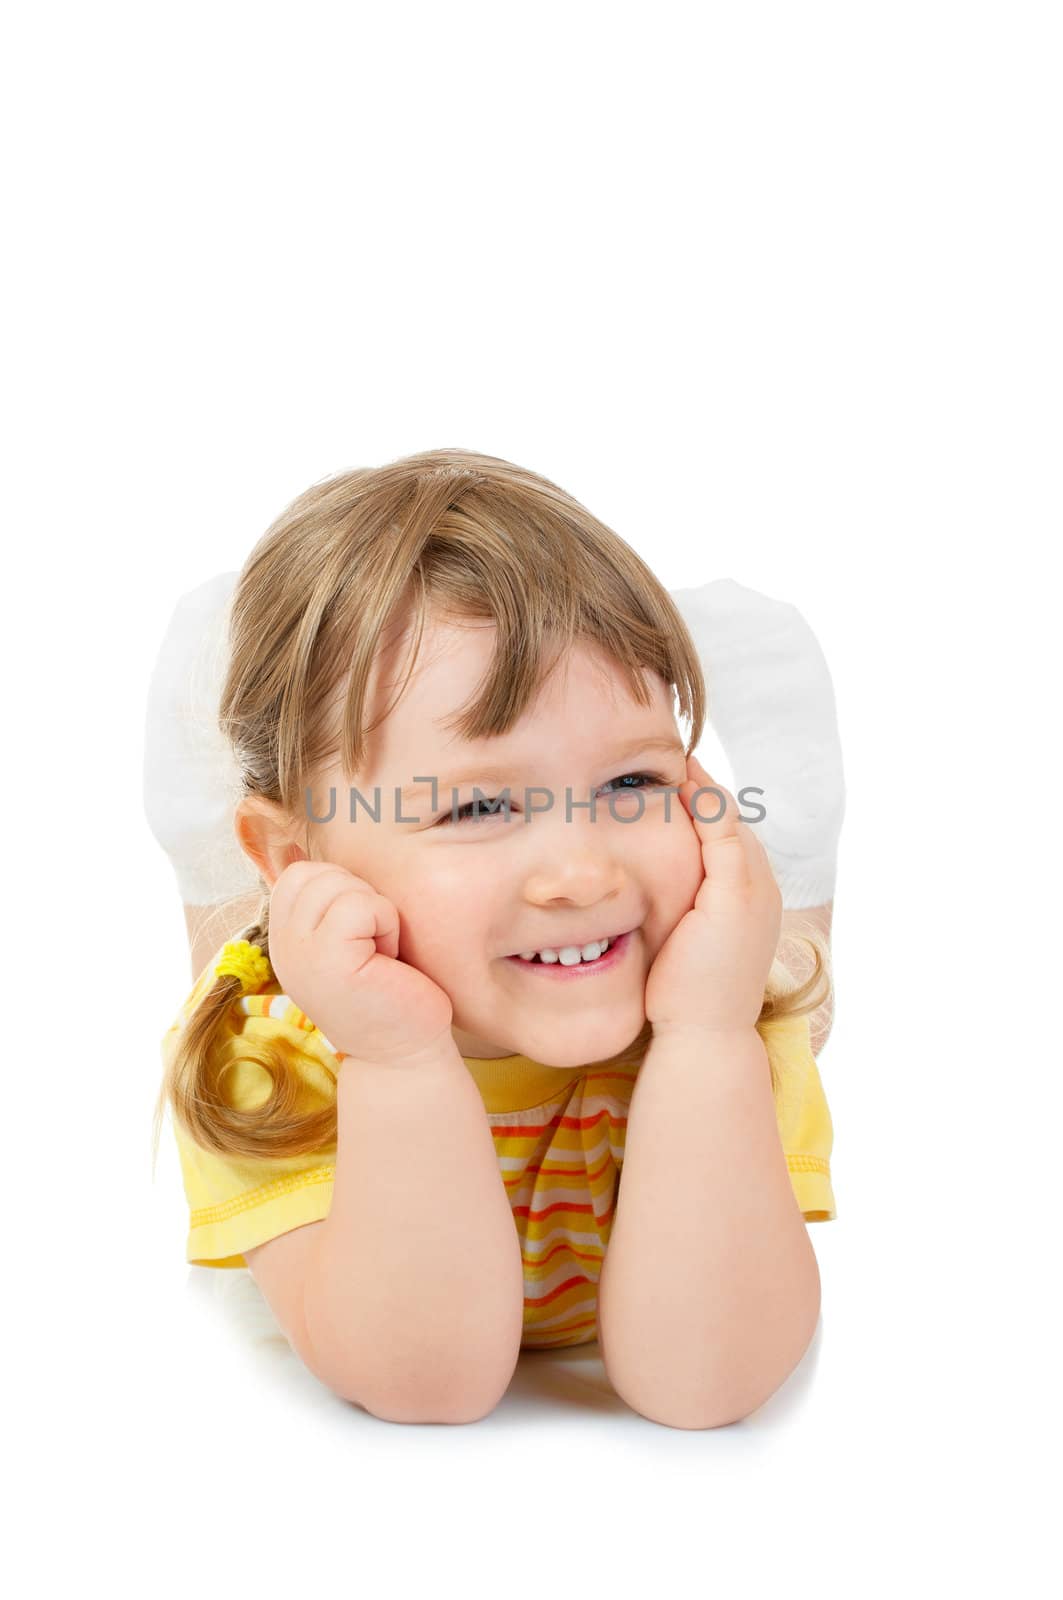 Little smiling girl closeup portrait isolated